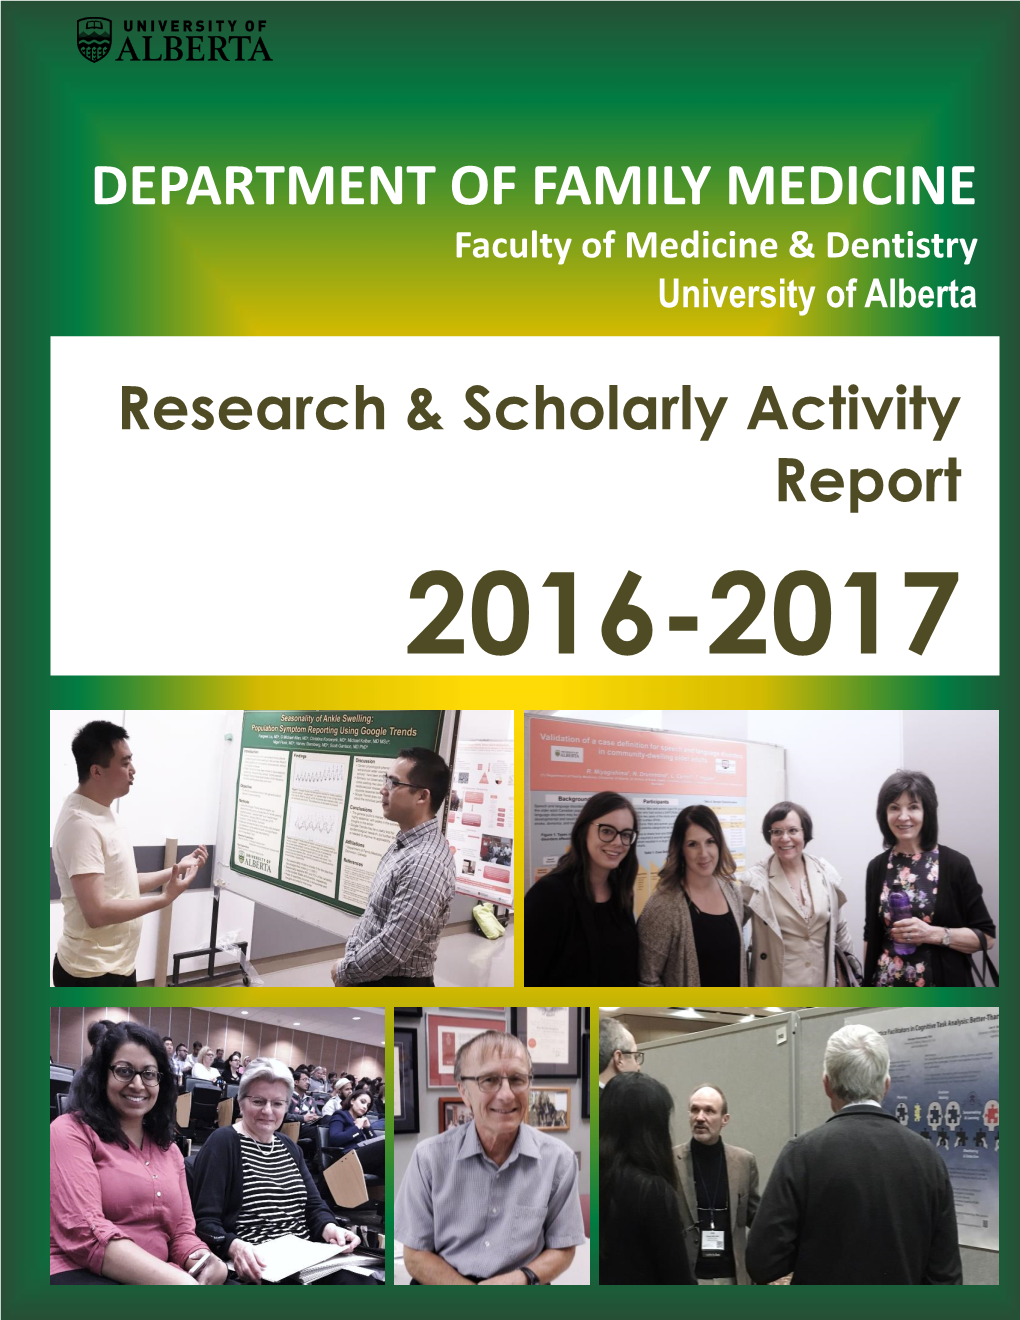 DEPARTMENT of FAMILY MEDICINE Research & Scholarly Activity Report